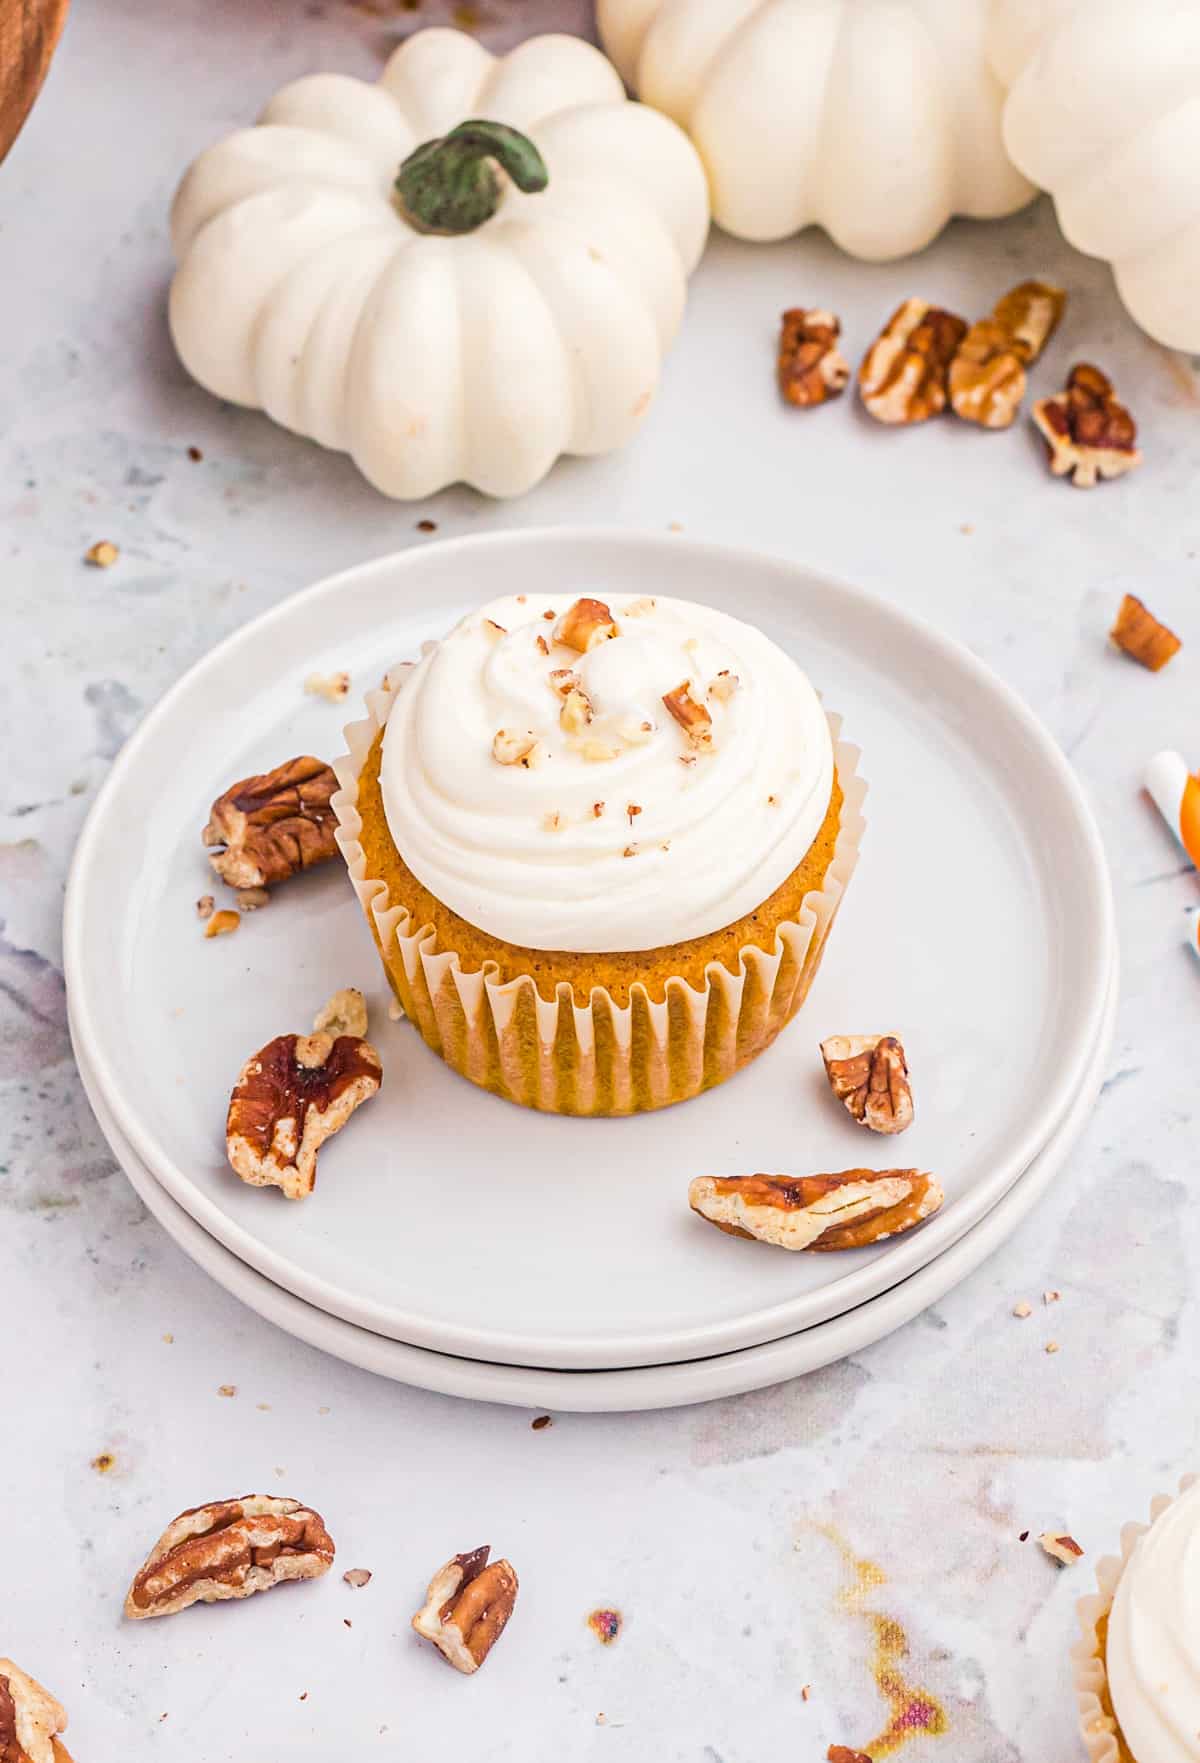 Overhead image of one finished cupcake on white plate with pecans and white pumpkins behind plate.